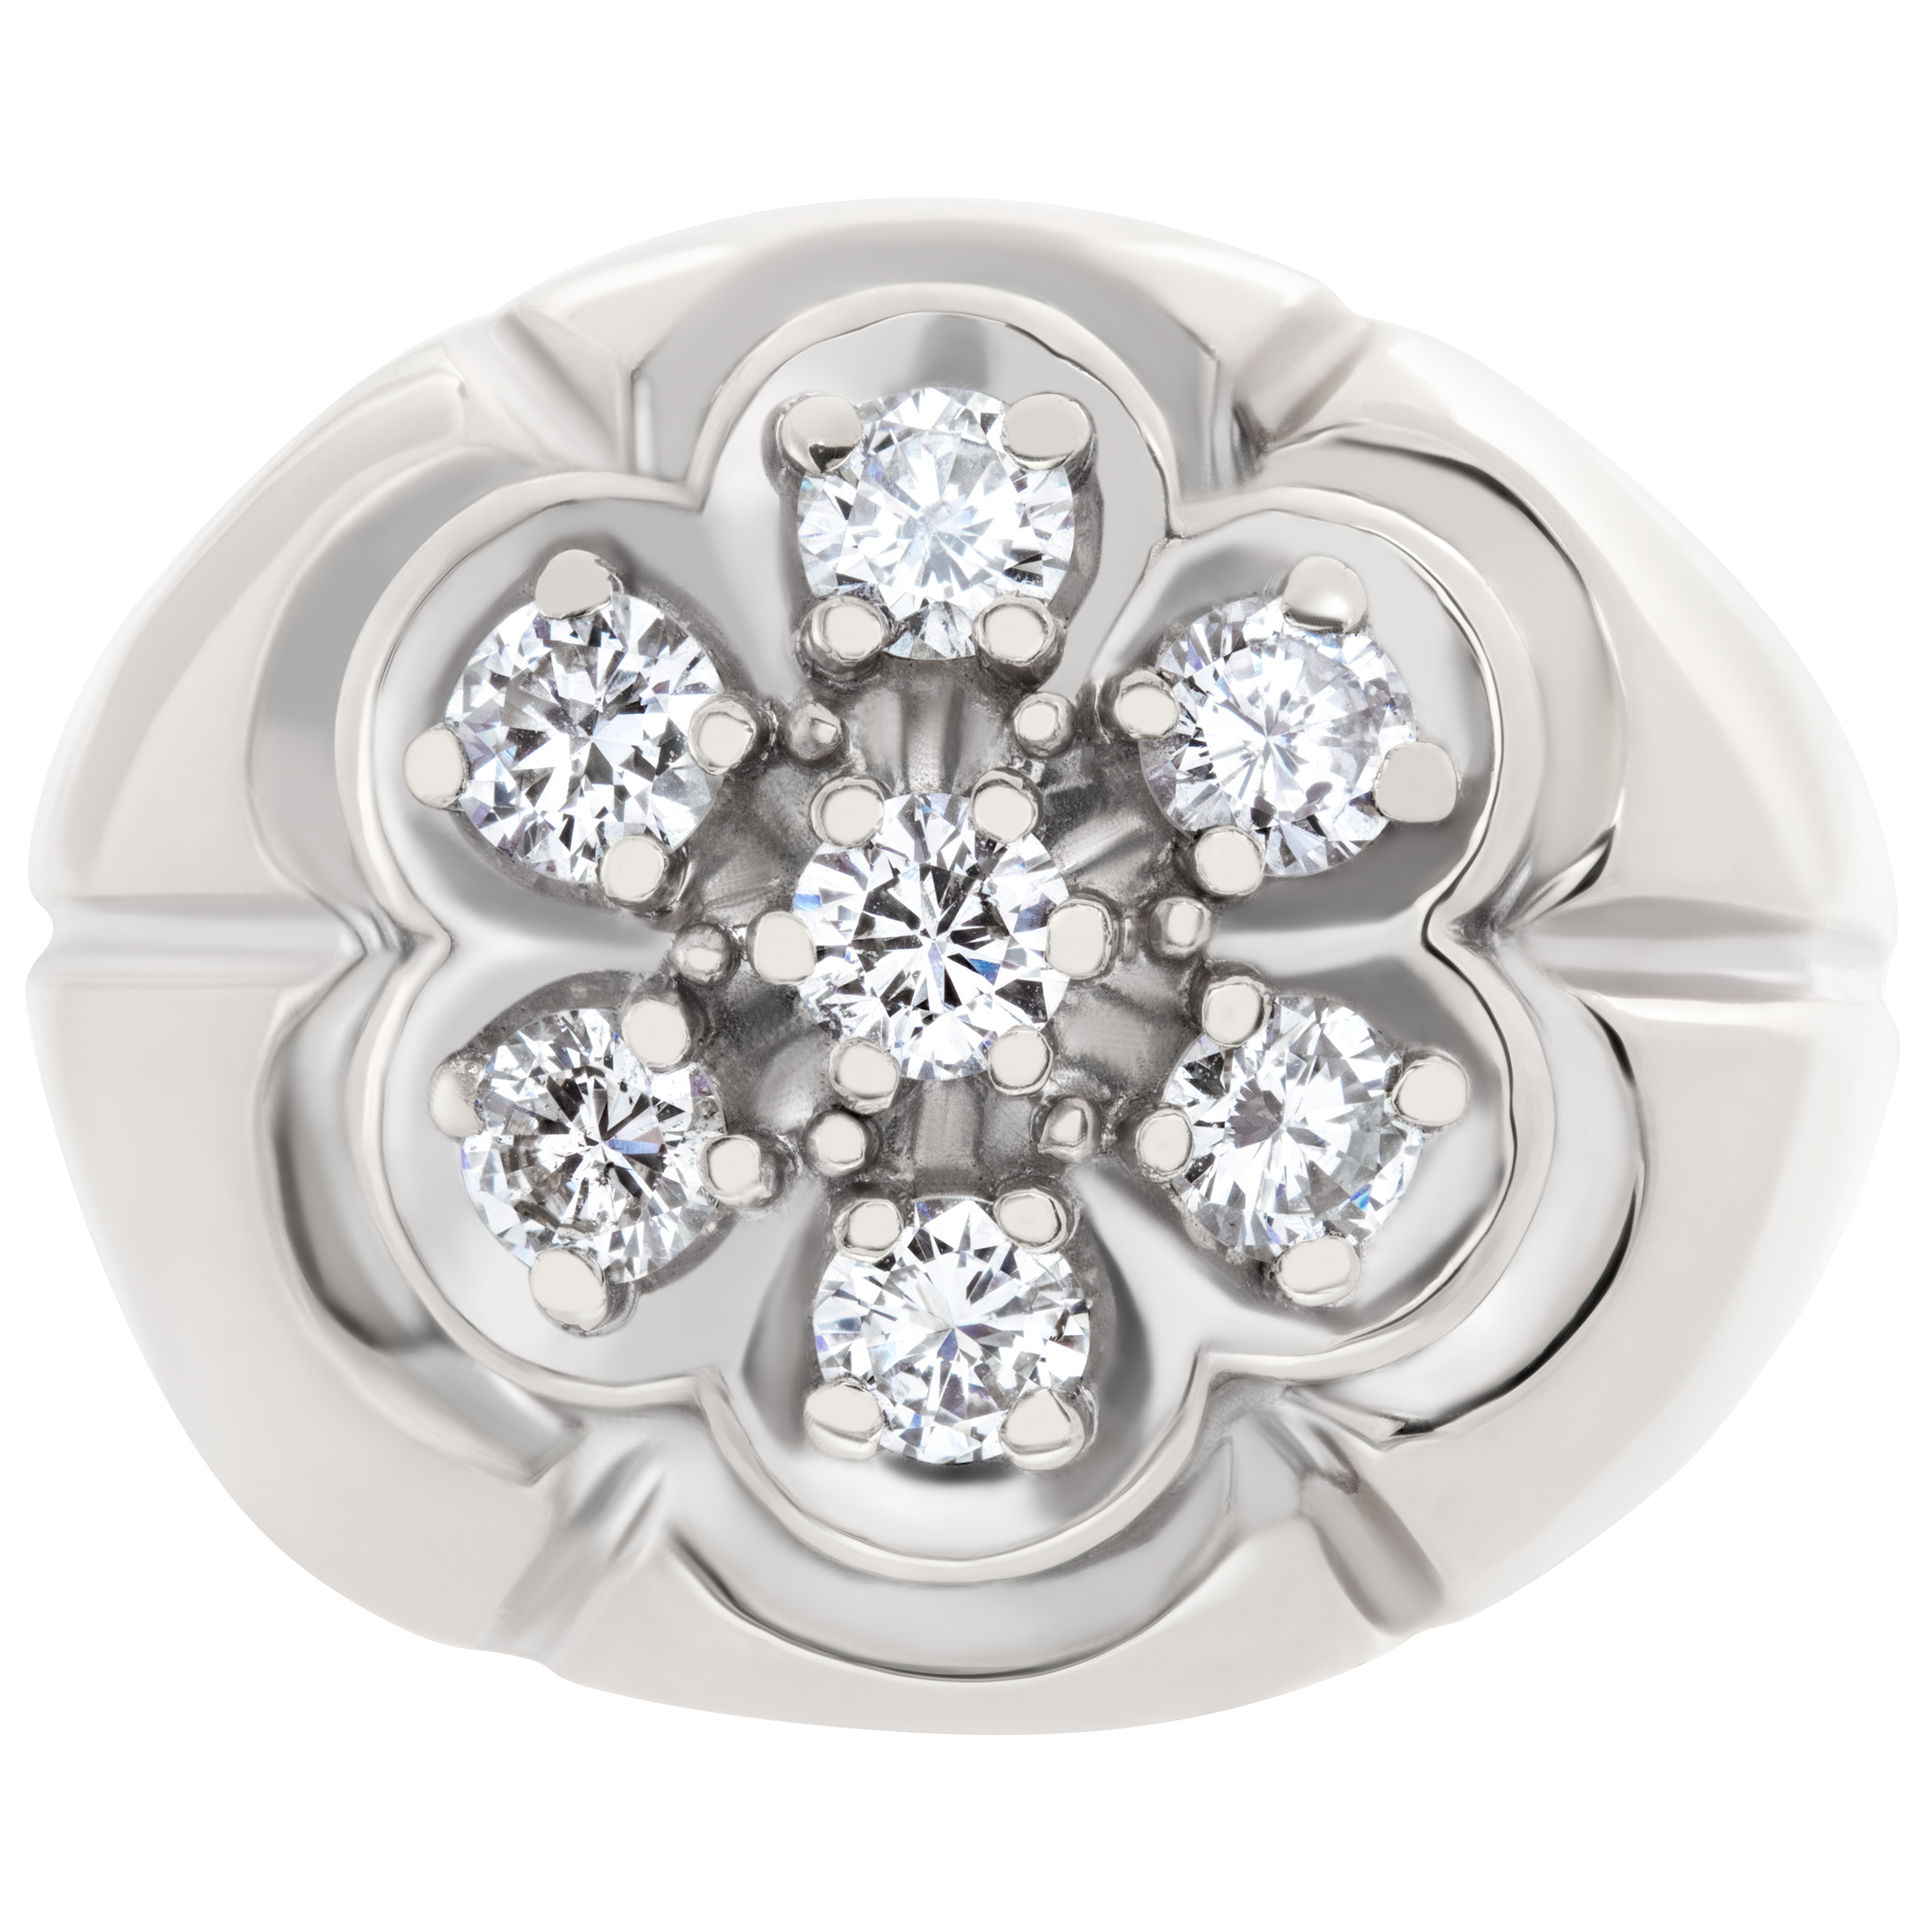 Cluster diamond ring in 14k white gold with approximately 1.00 carat round brilliant cut diamonds image 2